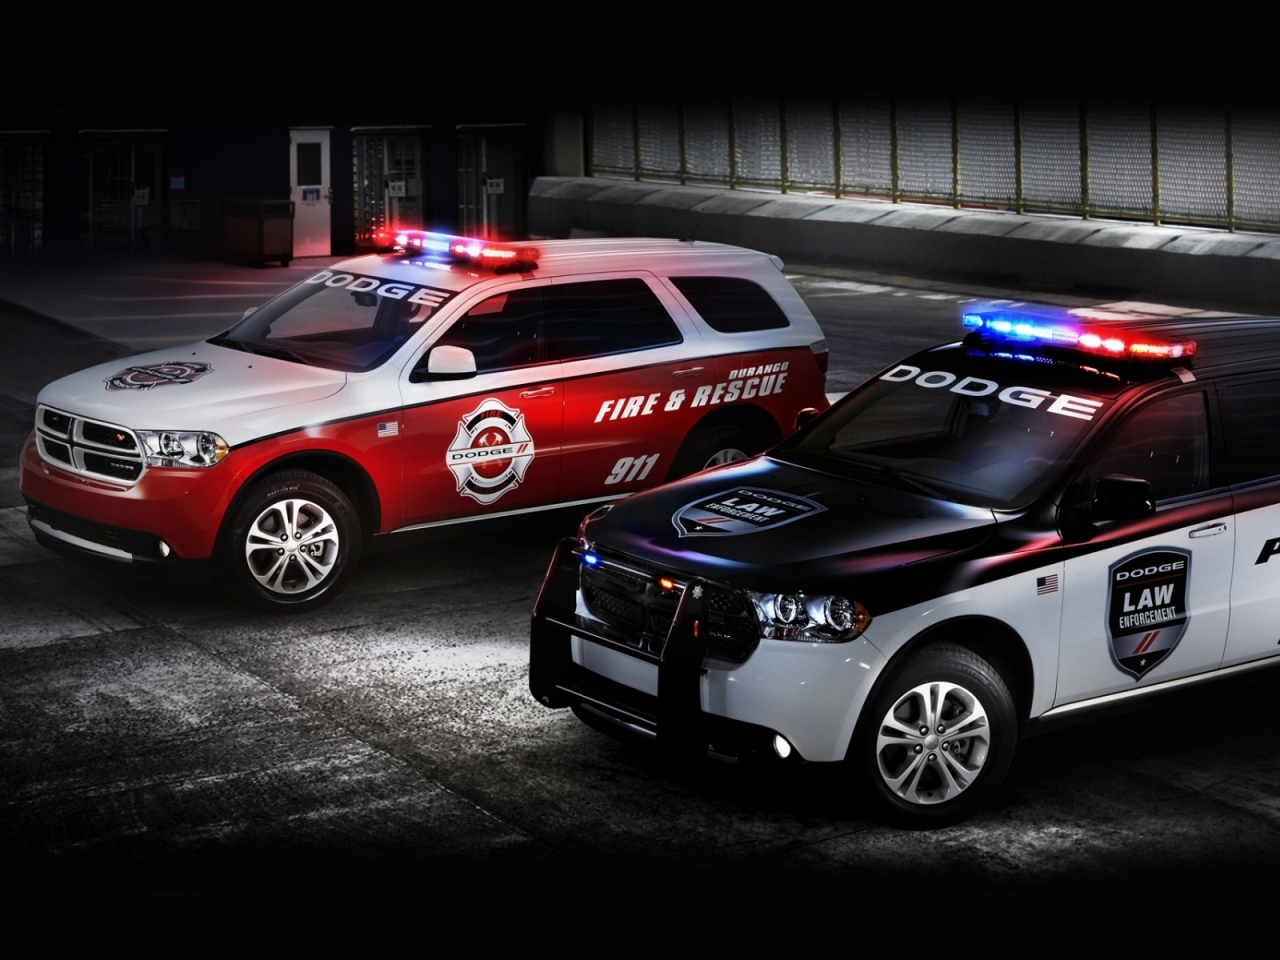 Dodge Police and Fire Cars for 1280 x 960 resolution